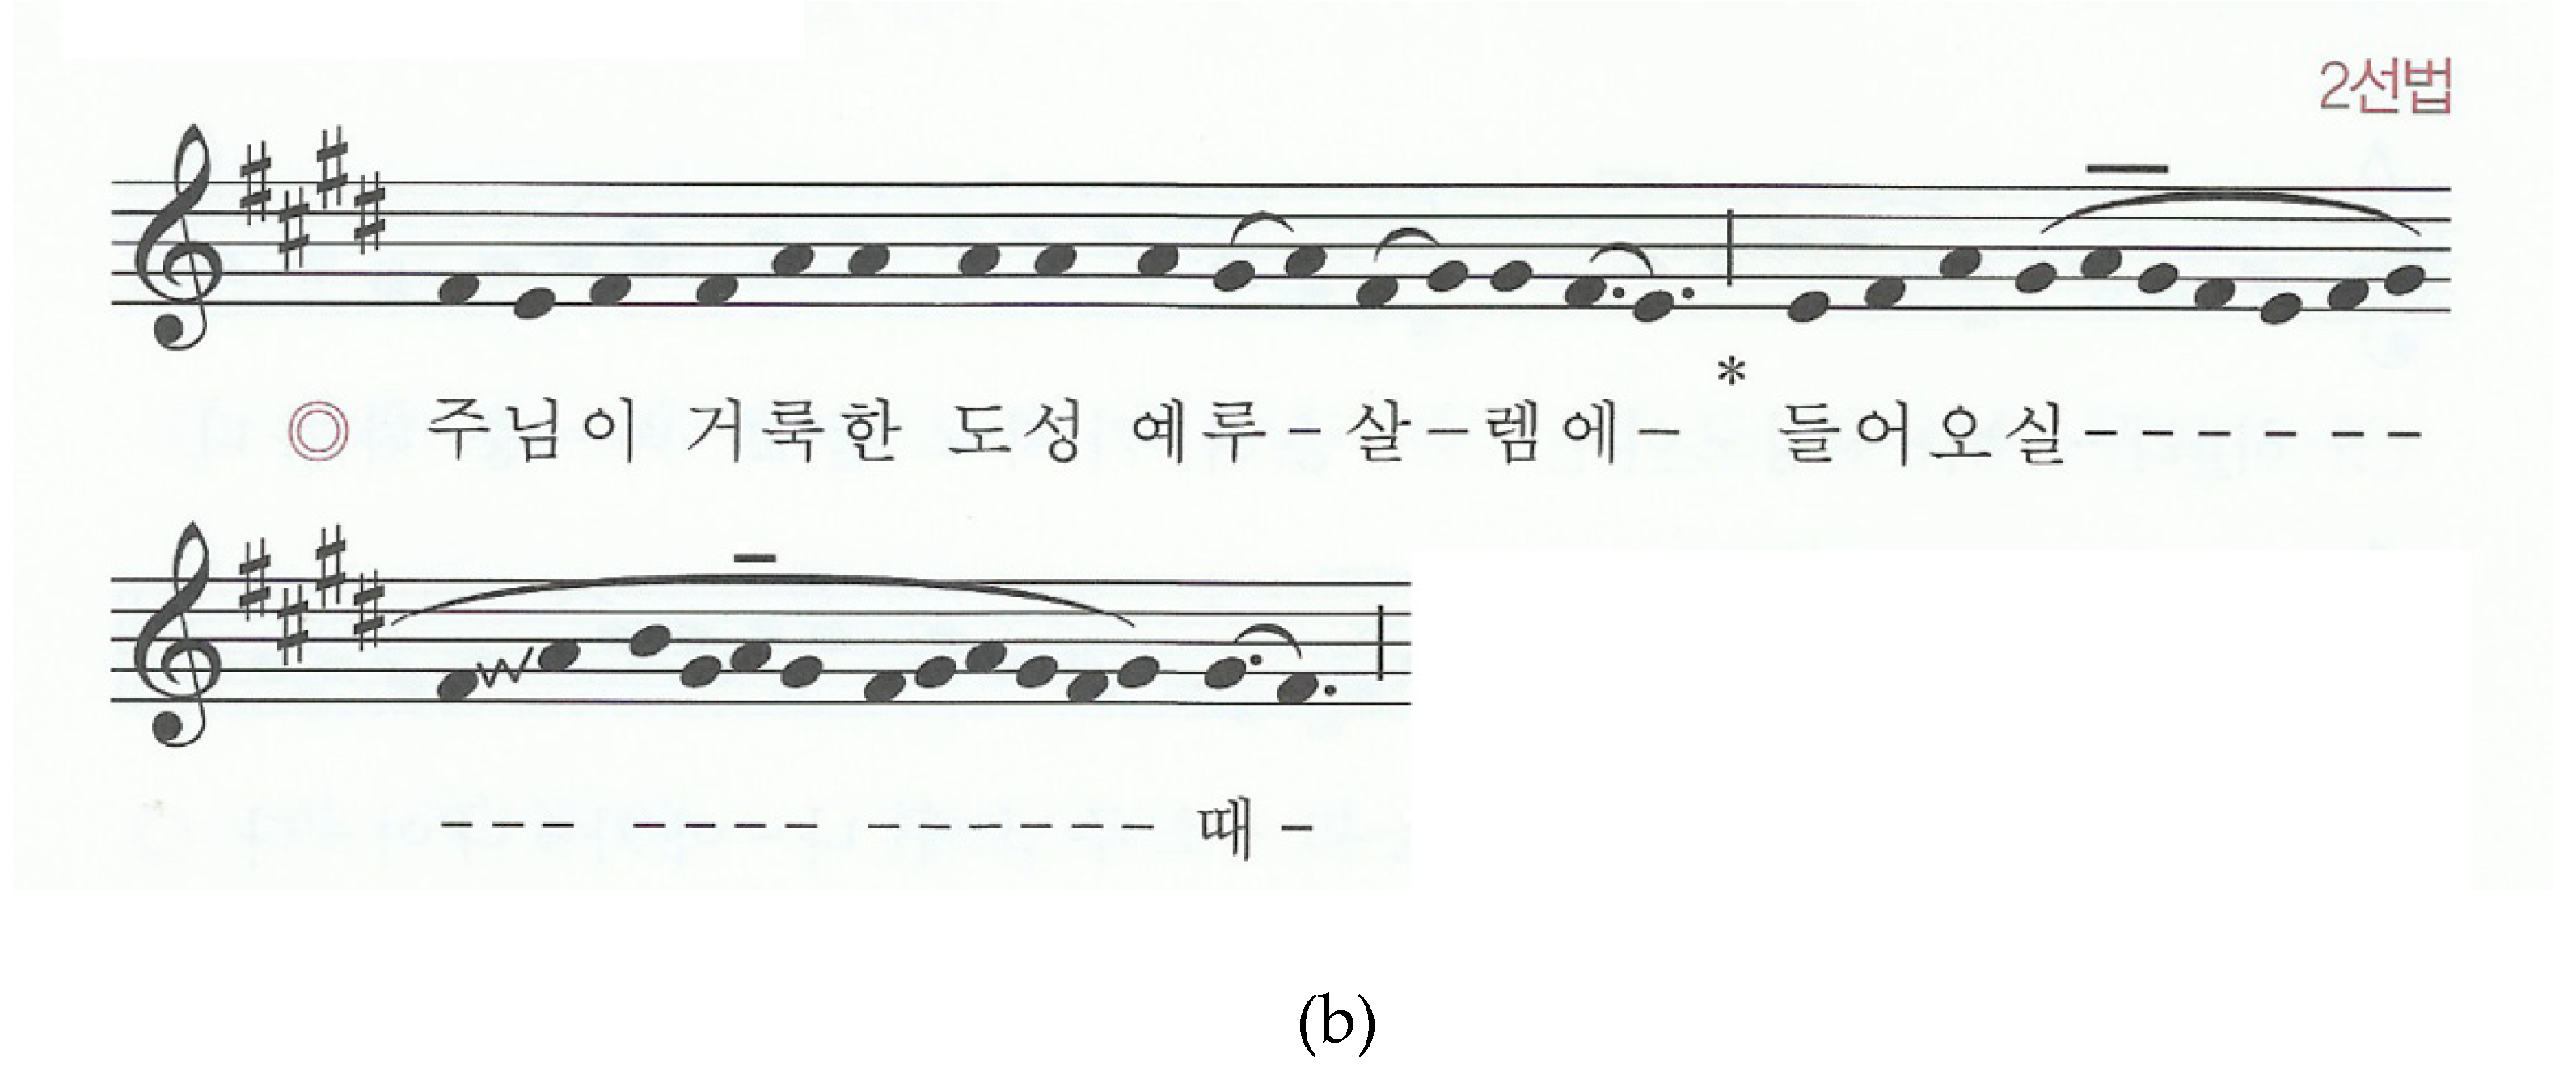 Religions Free Full-Text The Liturgical Usage of Translated Gregorian Chant in the Korean Catholic Church image photo image